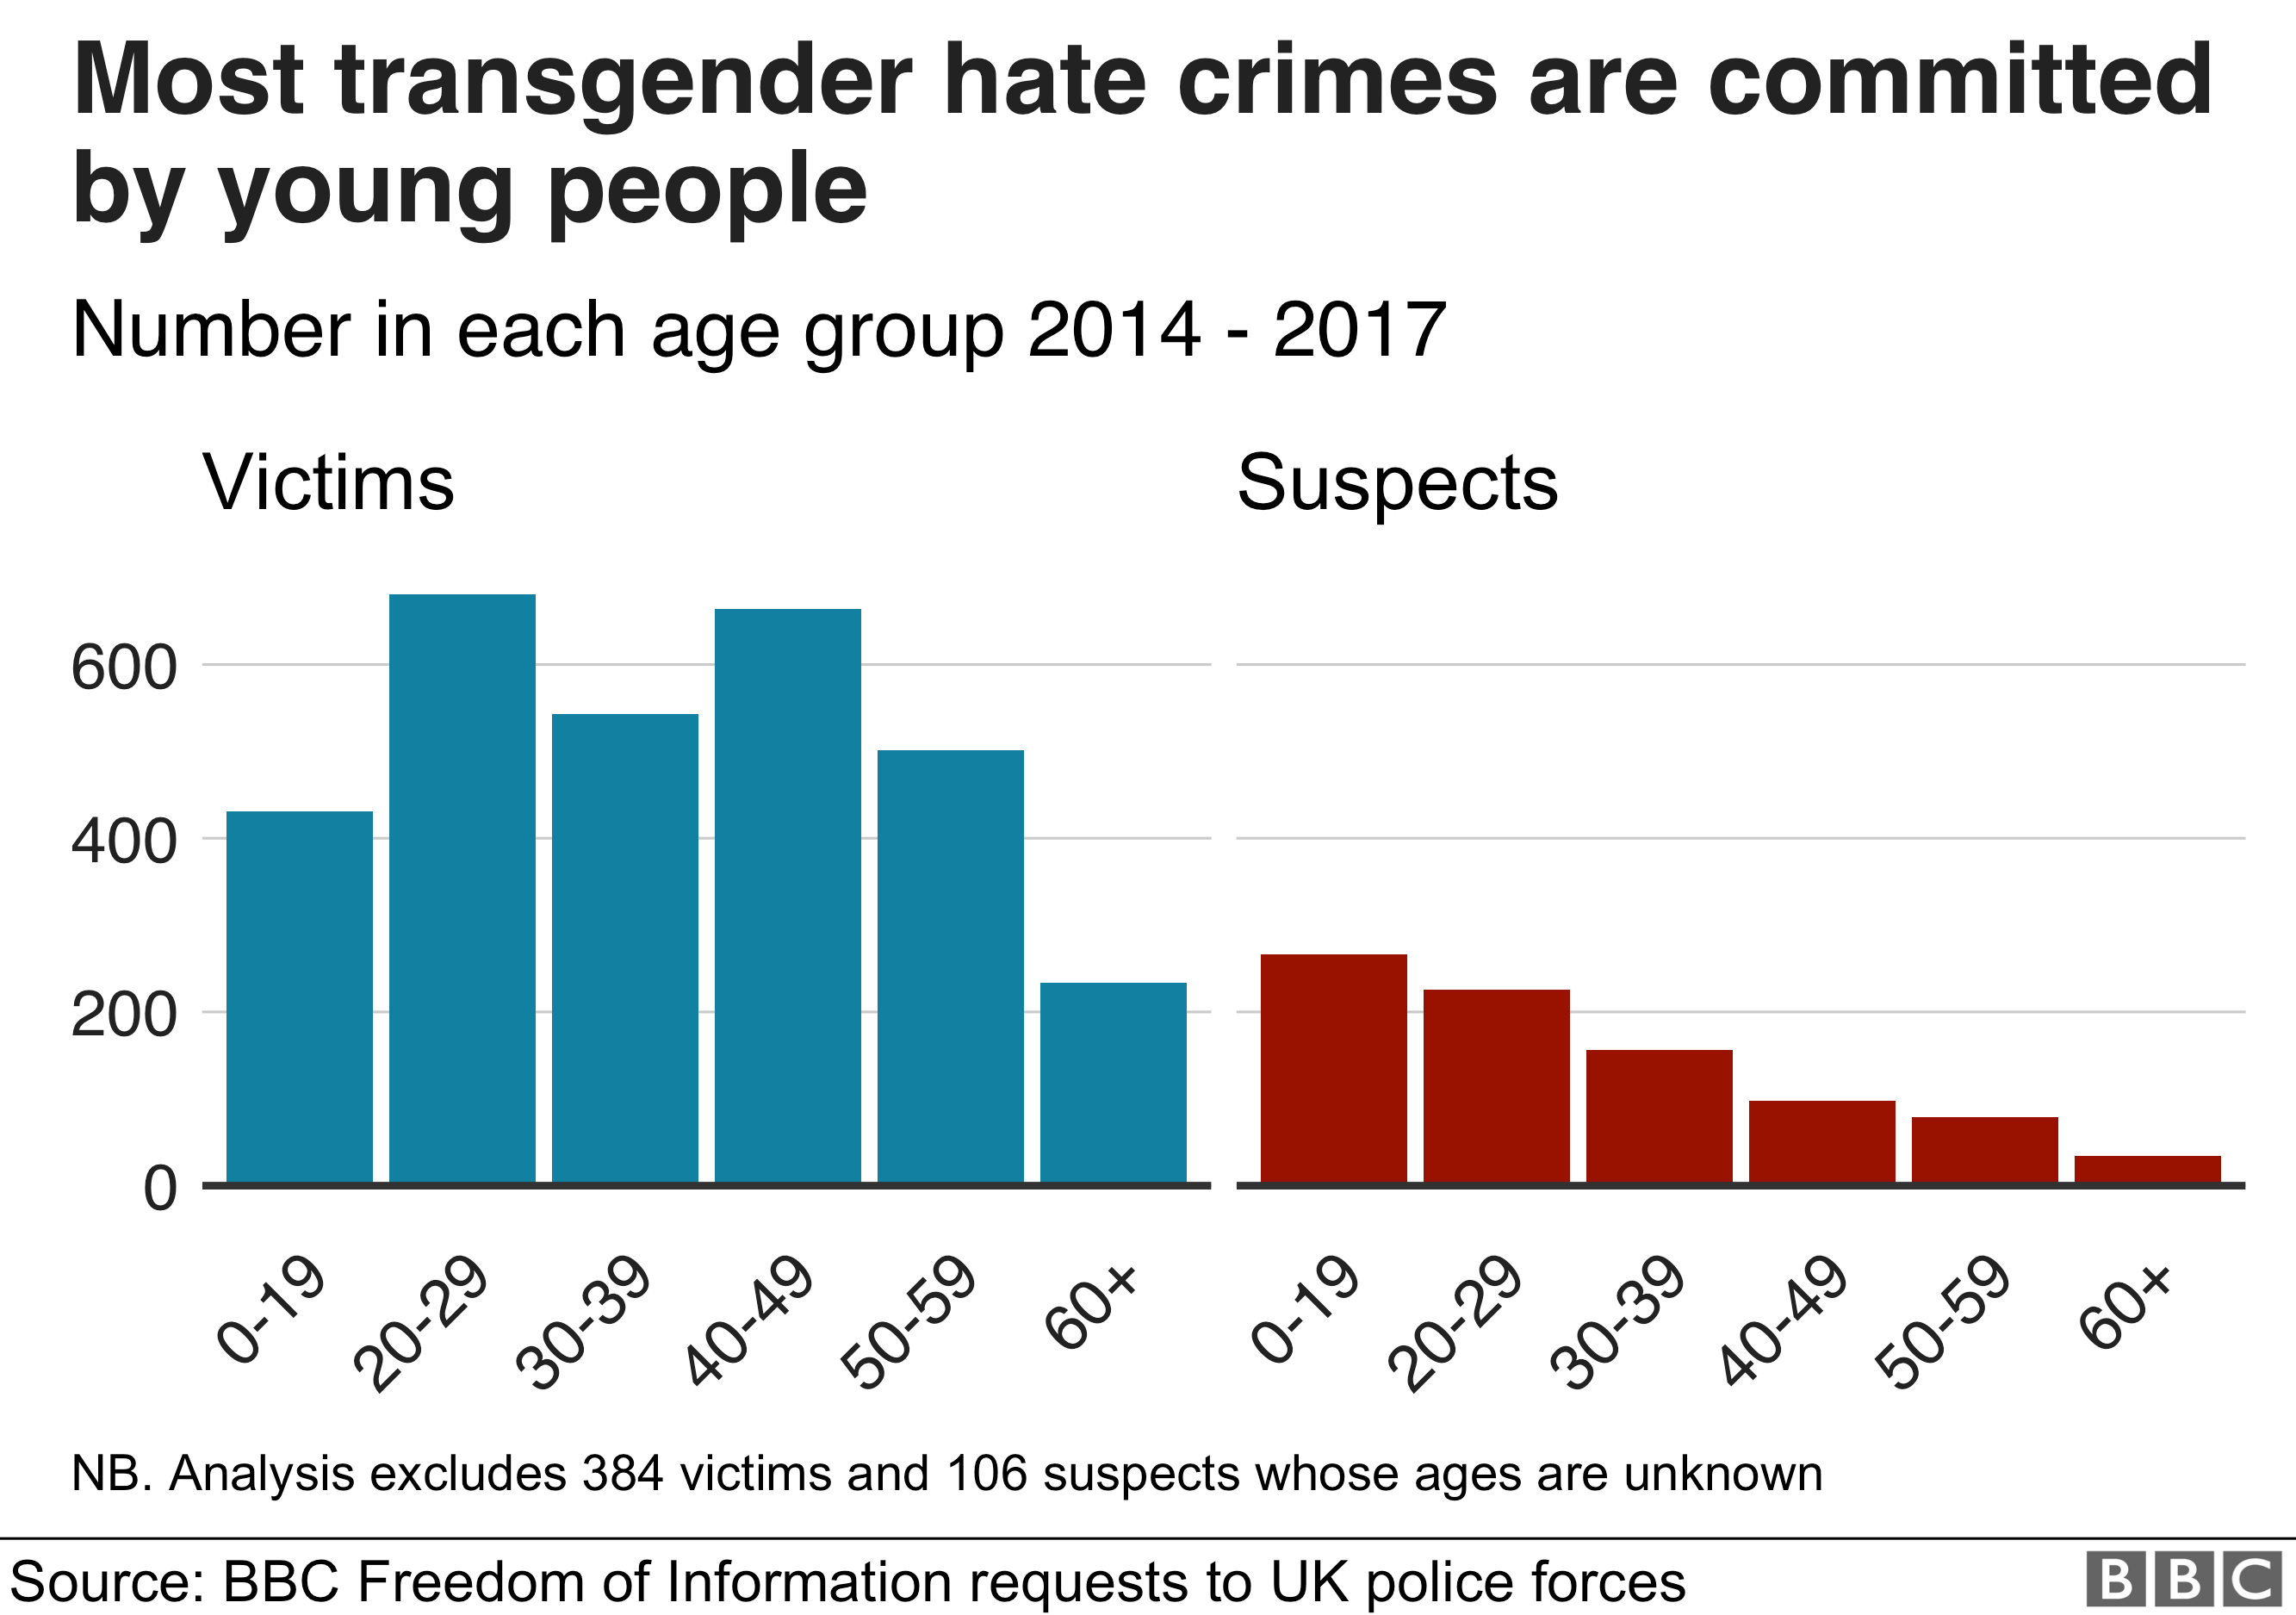 Hate Crime By Teens